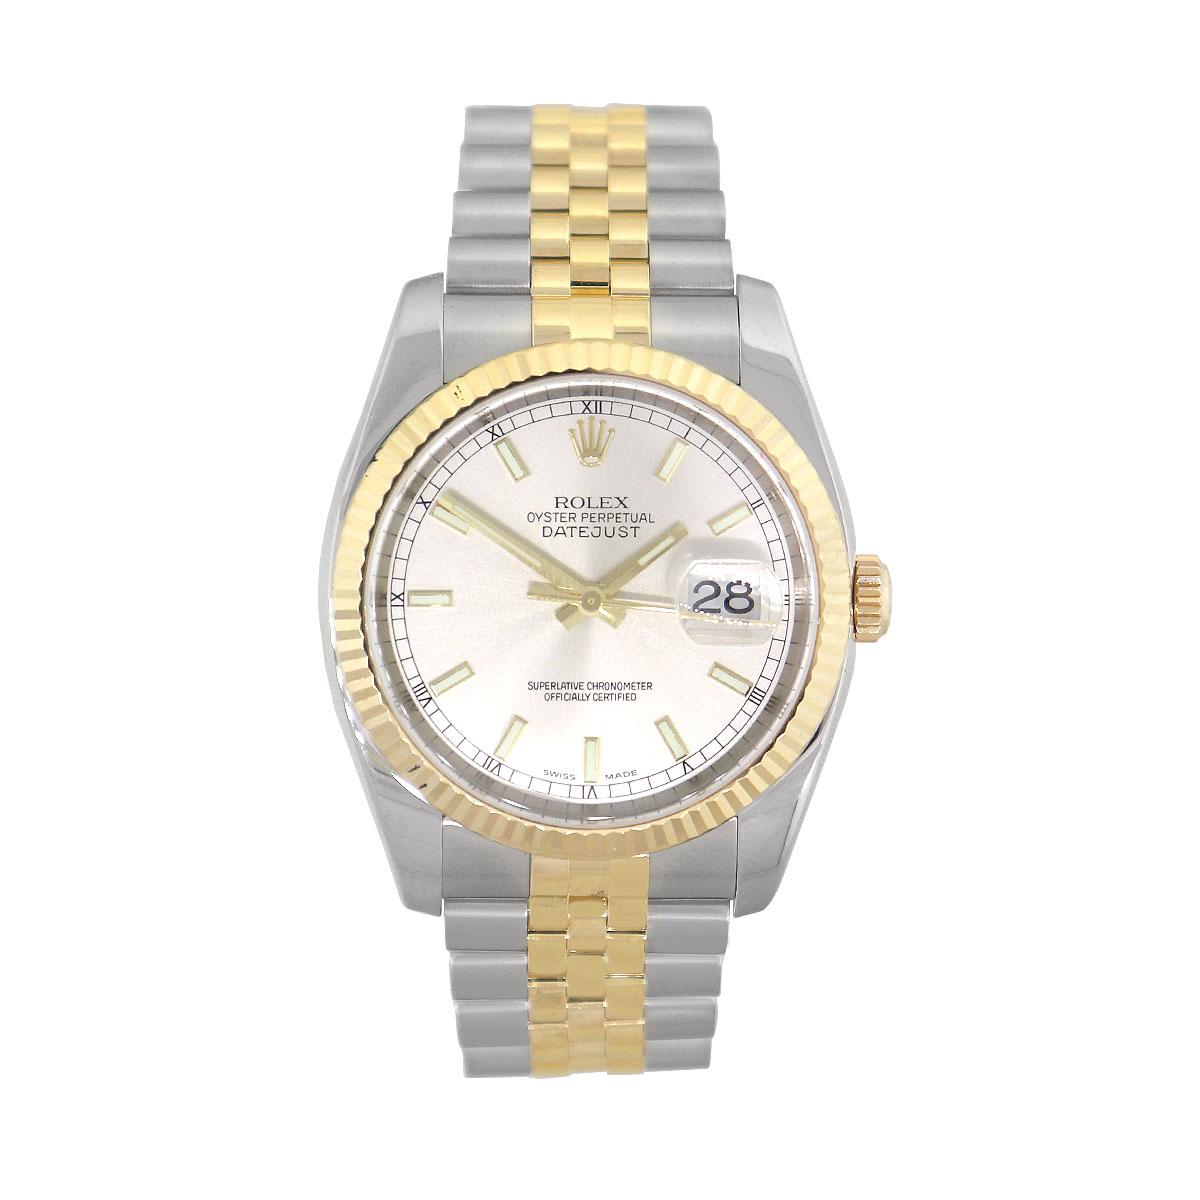 Brand: Rolex
MPN: 116233
Model: Datejust
Case Material: Stainless Steel
Case Diameter: 36mm
Crystal: Scratch resistant sapphire
Bezel: 18k Yellow Gold fluted bezel
Dial: Silver dial with yellow gold stick hours and hands. Date can be found at 3